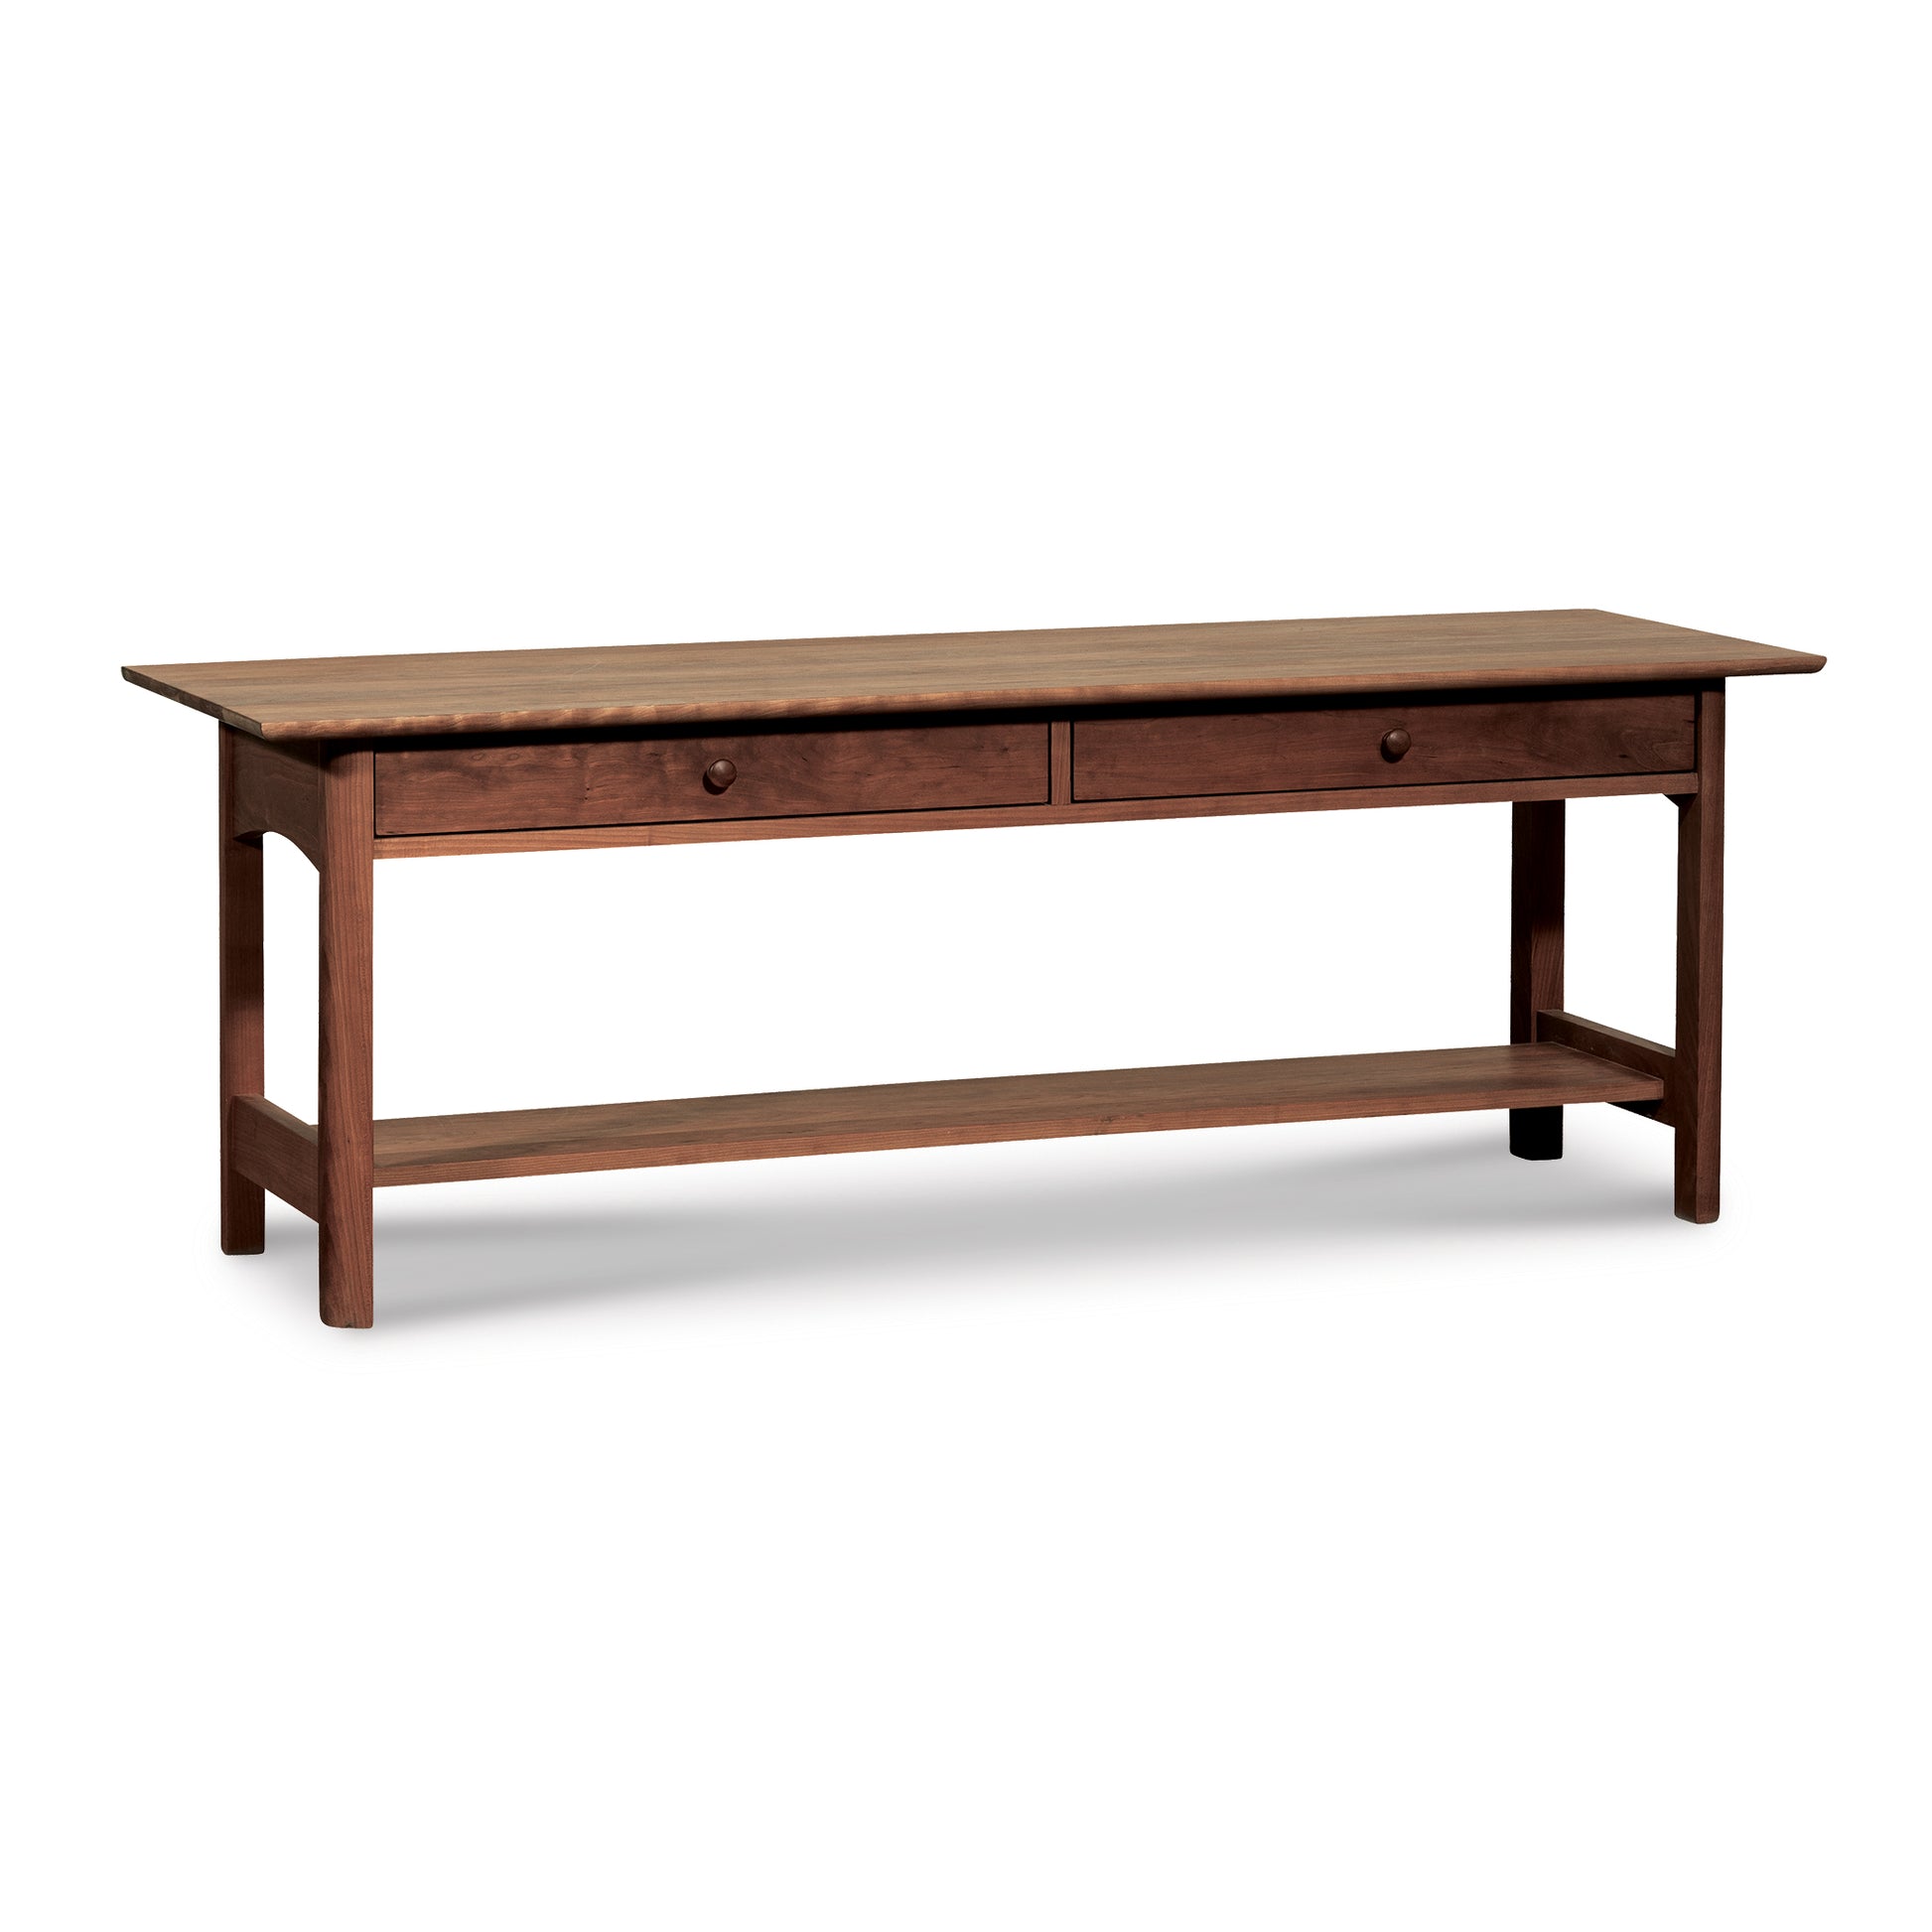 Heartwood Shaker 2-Drawer Coffee Table by Vermont Furniture Designs, with a lower shelf and featuring an eco-friendly oil finish, isolated on a white background.